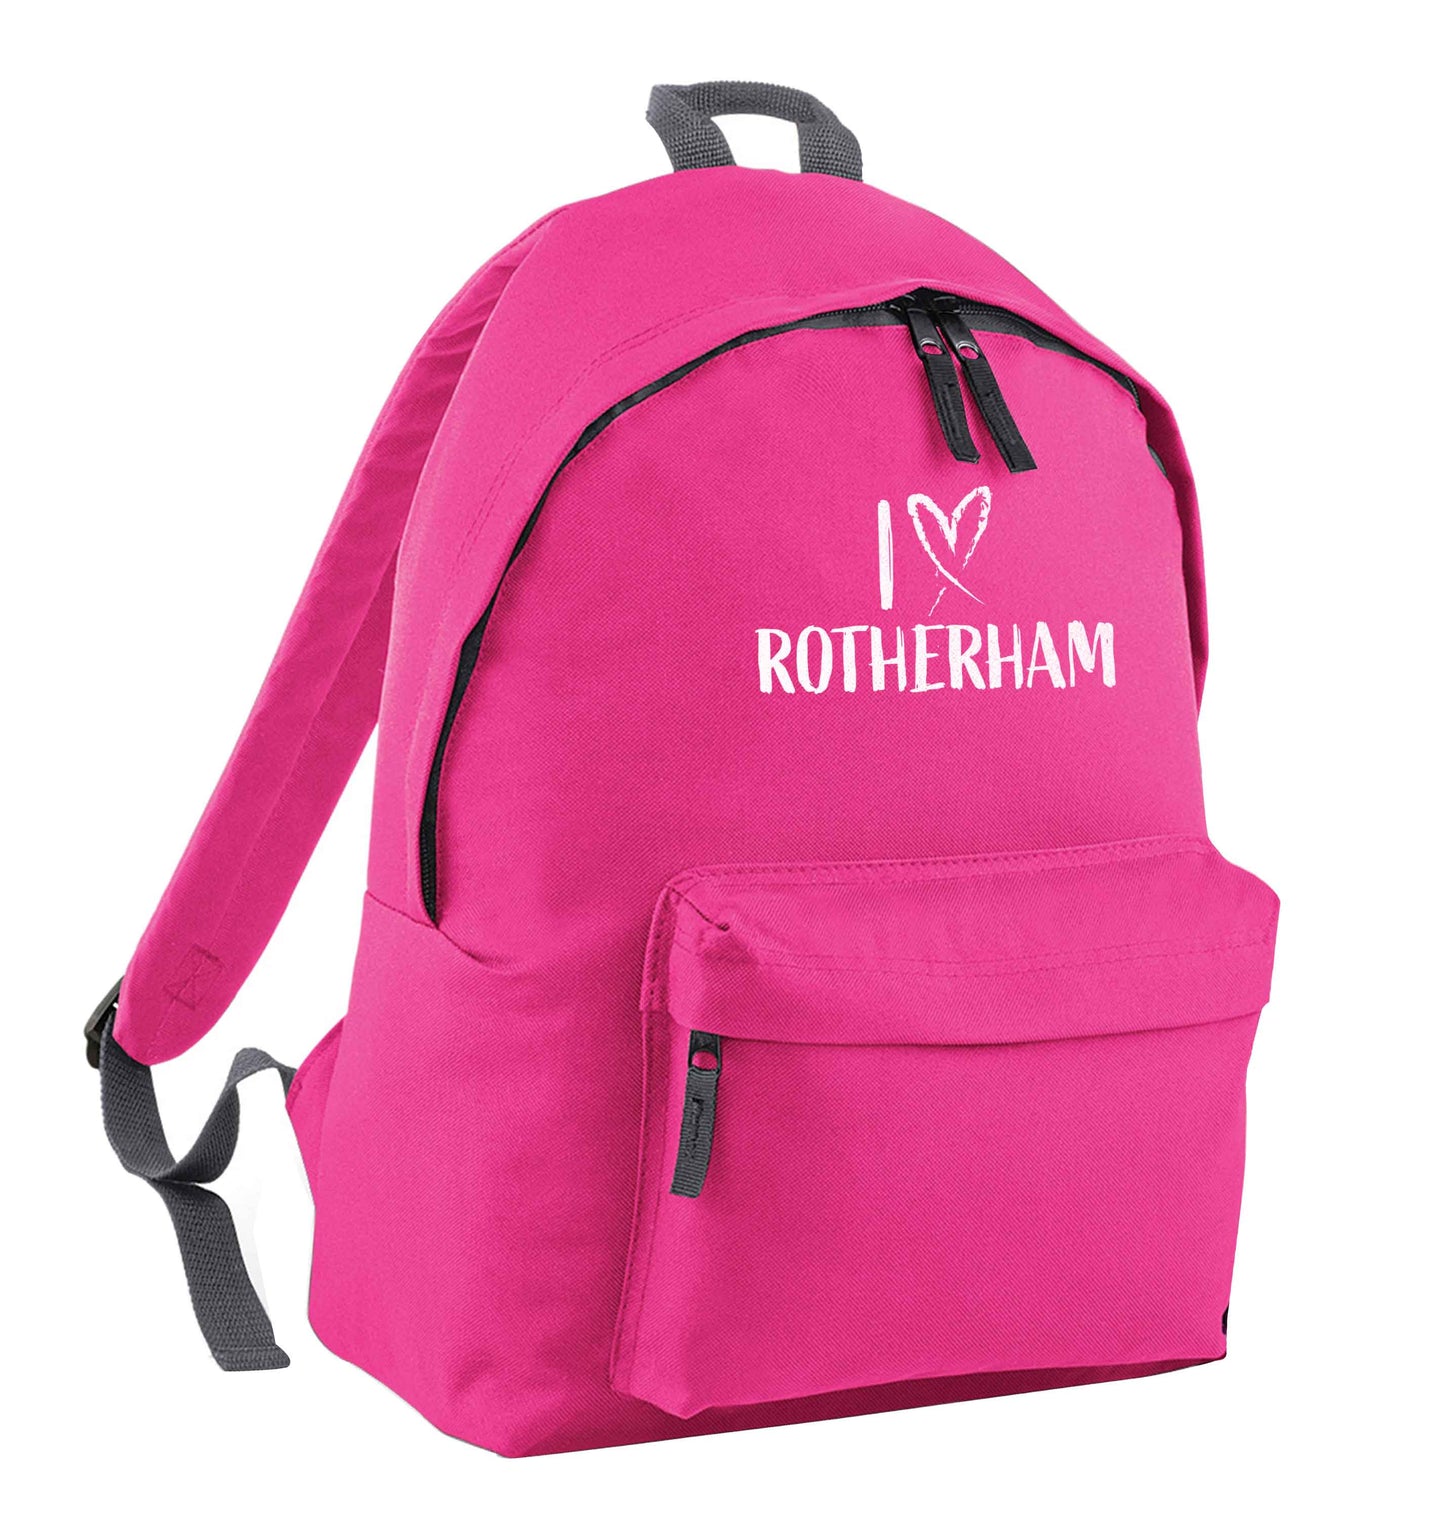 I love Rotherham pink adults backpack